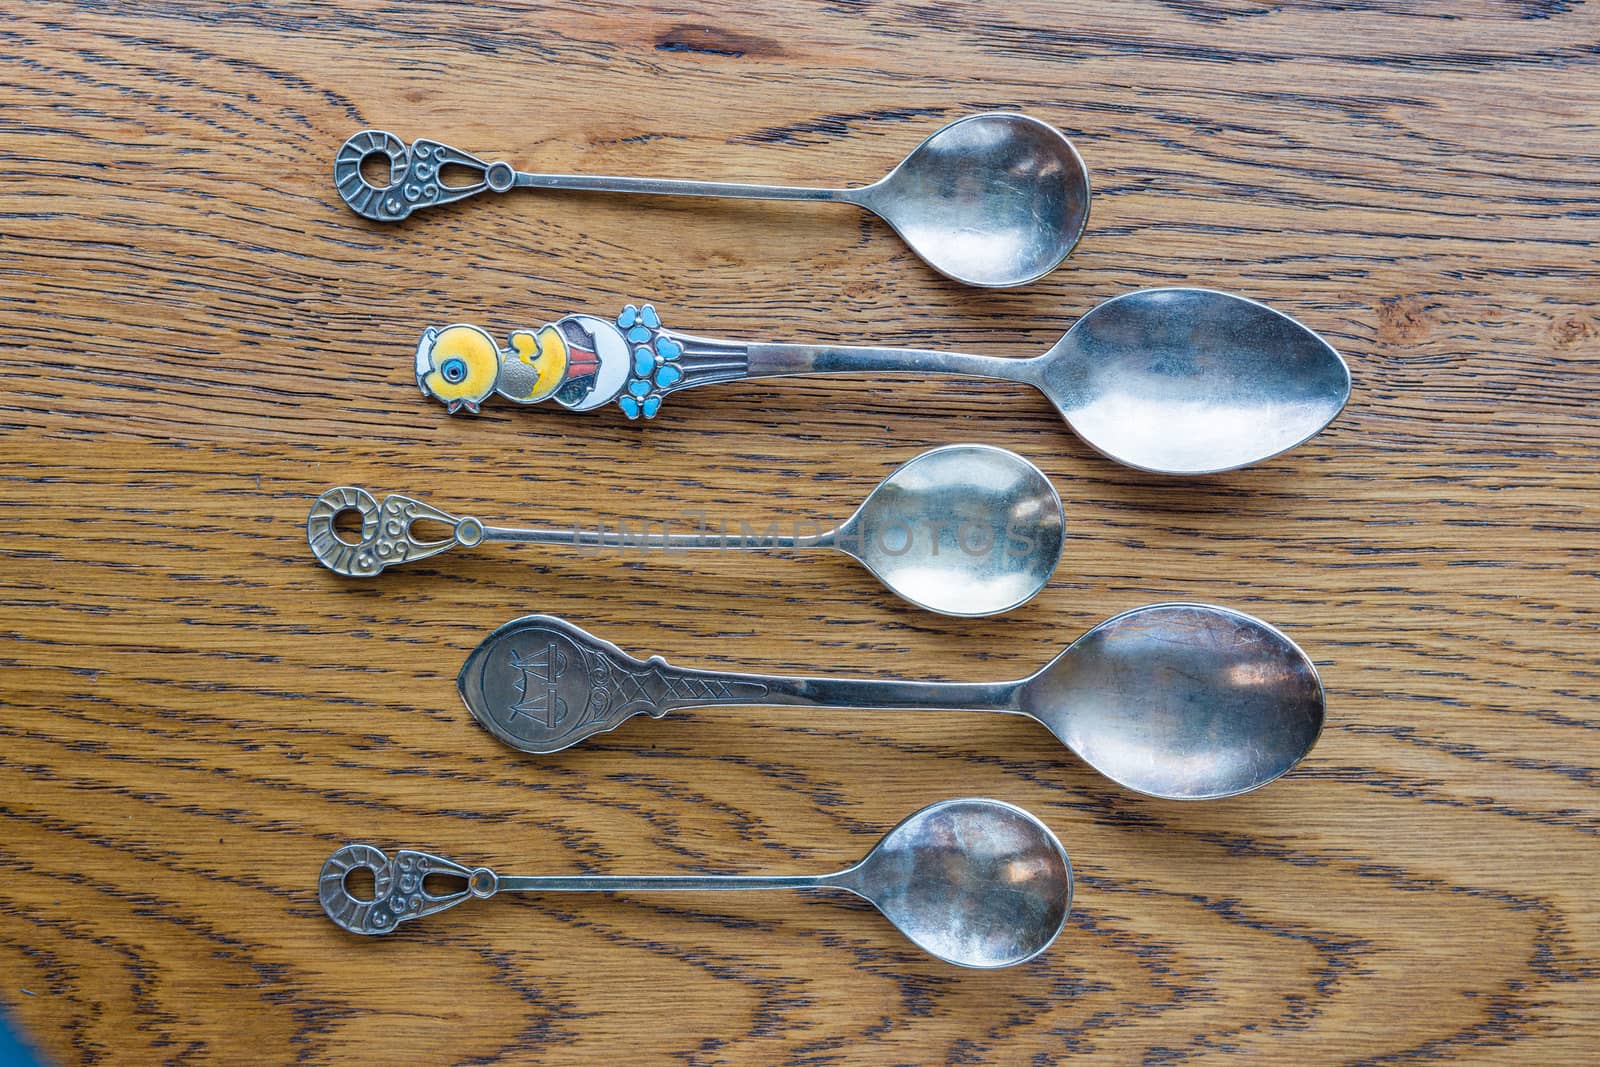 Five antique, decorative spoons on an oak table by ben44